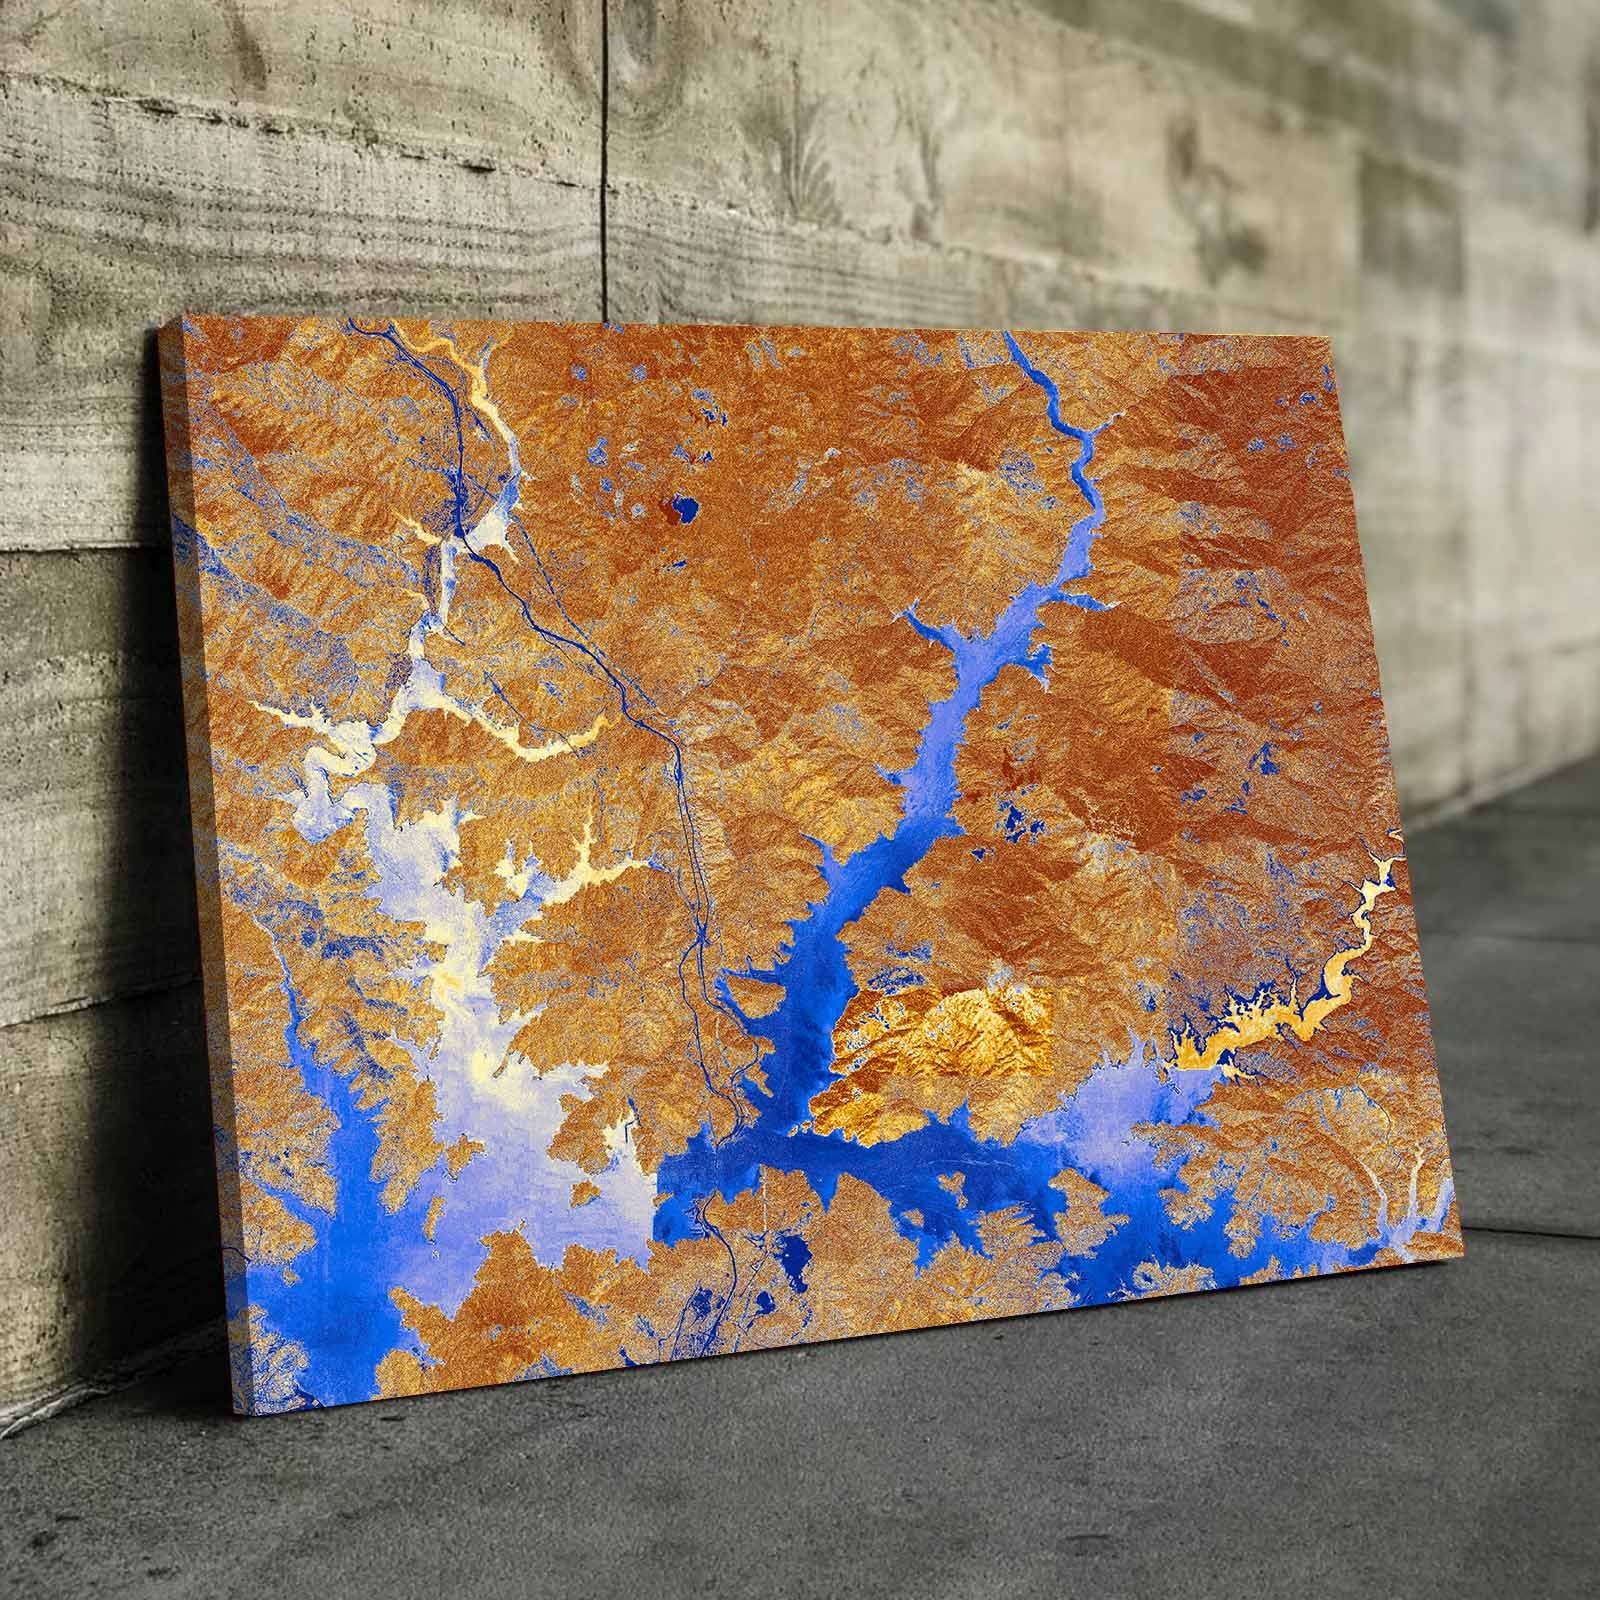 Lake Shasta Art From Space | Classy Blue and Gold | Gallery Quality Canvas Wrap - Houseboat Kings